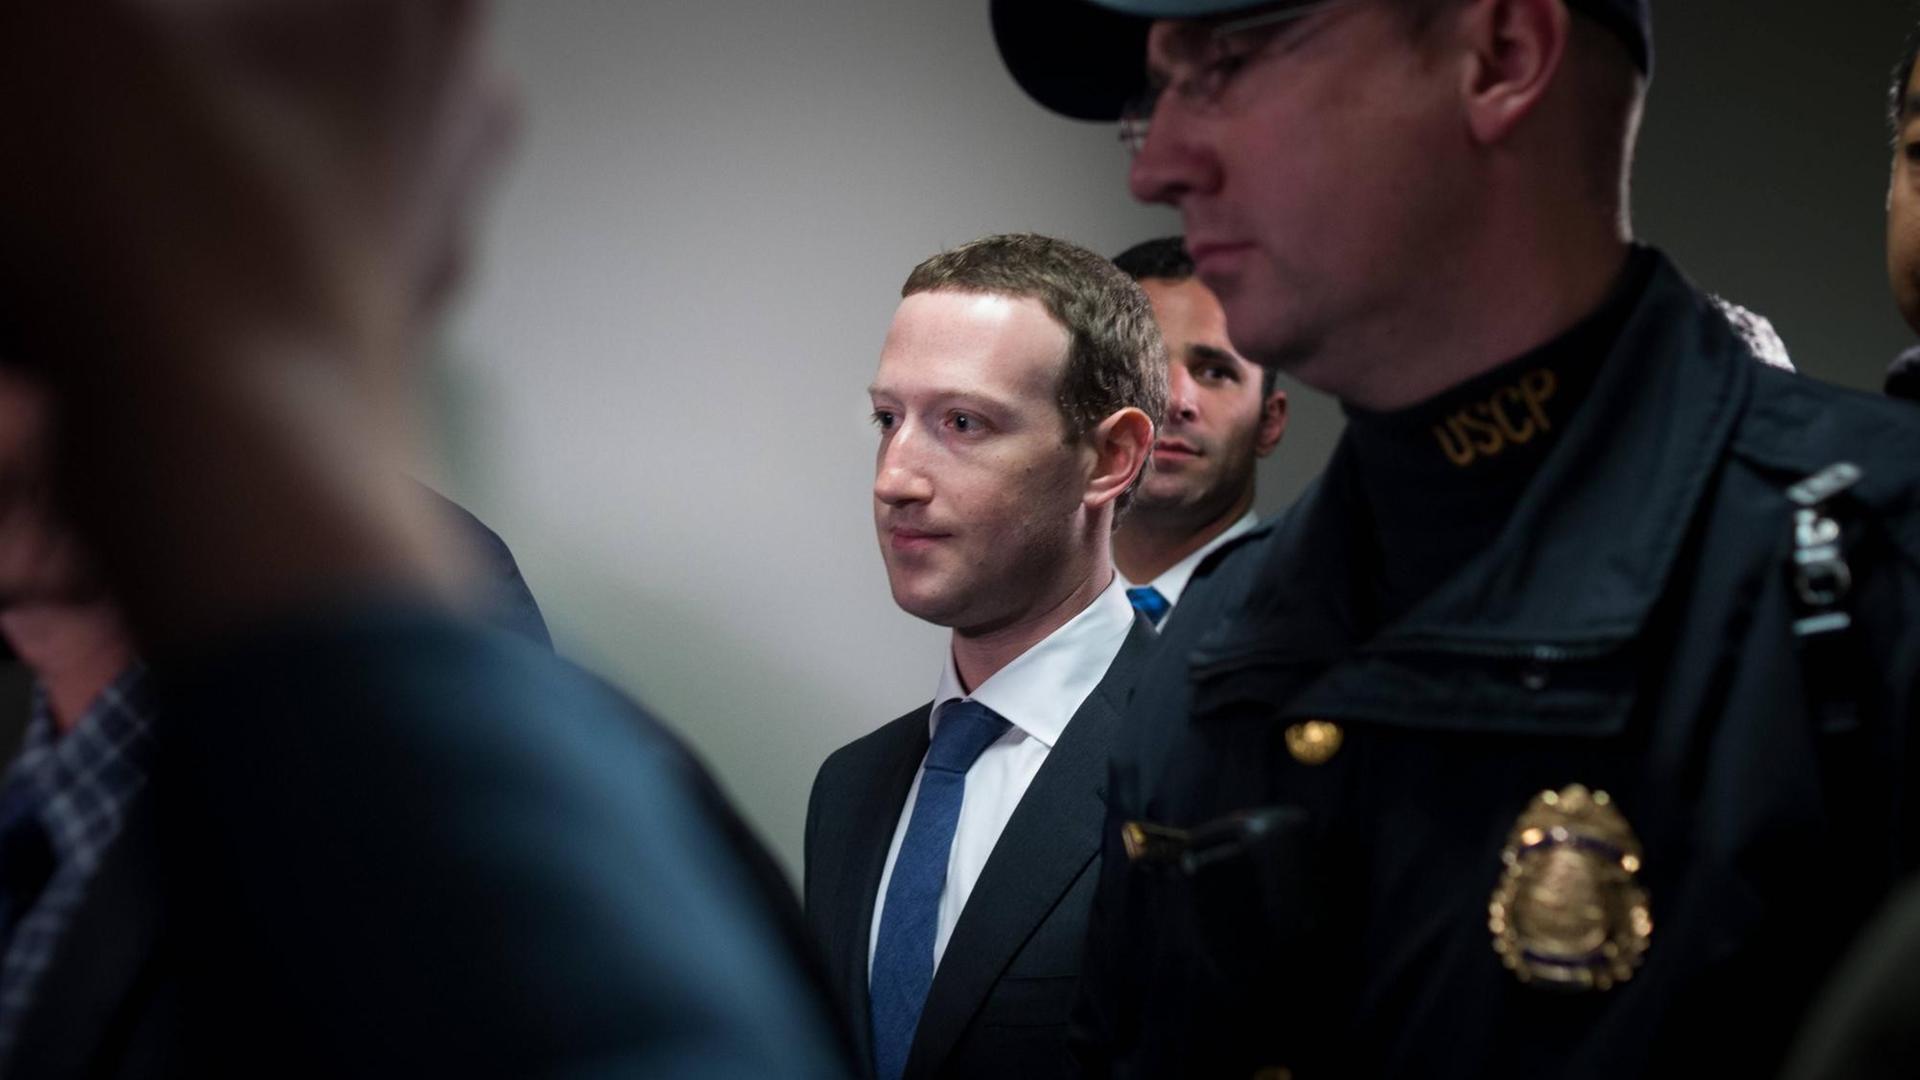 April 9, 2018 - Washington, District of Columbia, U.S - Facebook CEO Mark Zuckerberg meets with senators on Capitol Hill before his appearance at two congressional hearings this week. Washington U.S.